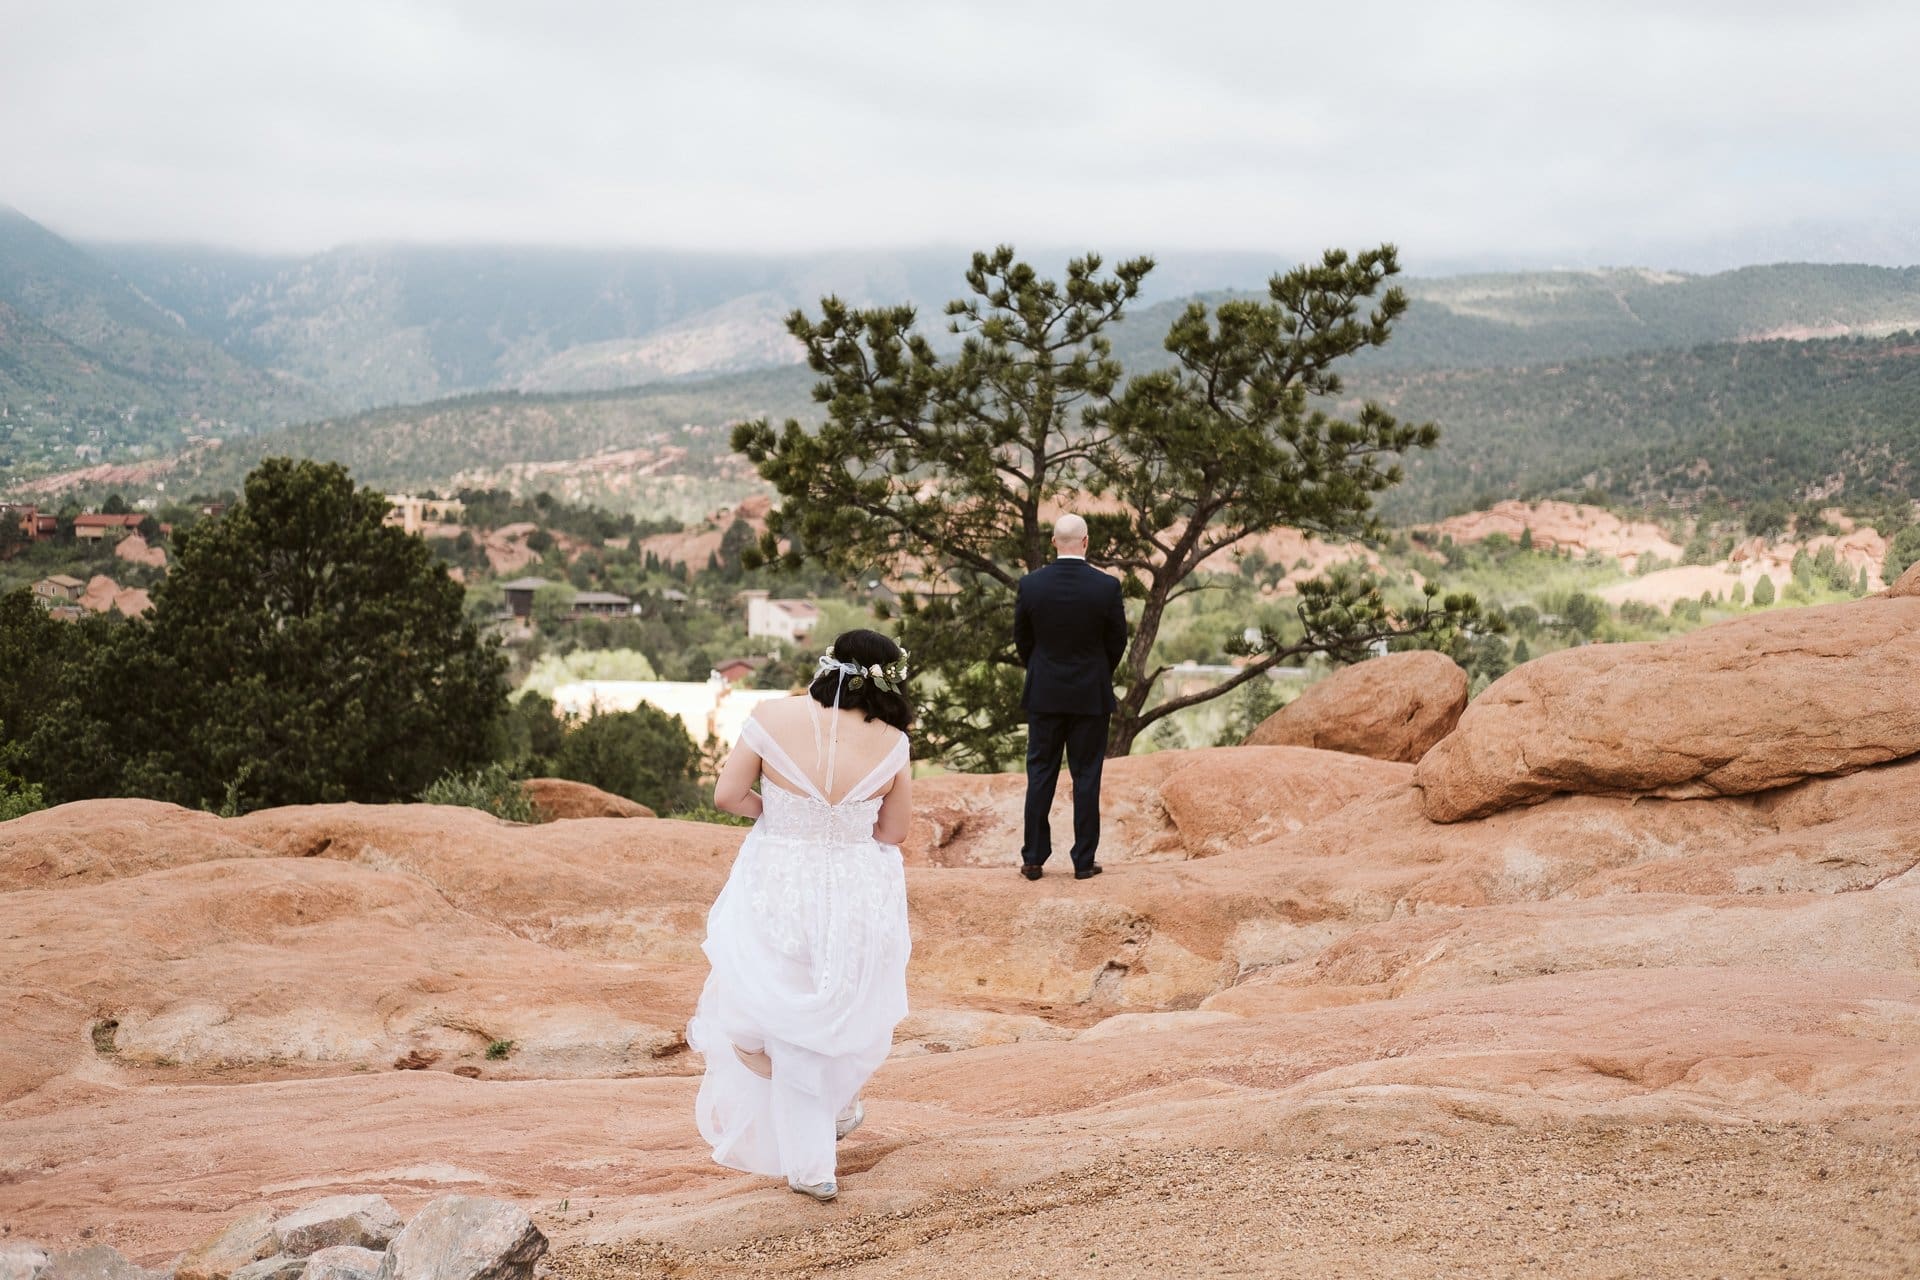 First look before elopement at Garden of the Gods in Colorado Springs